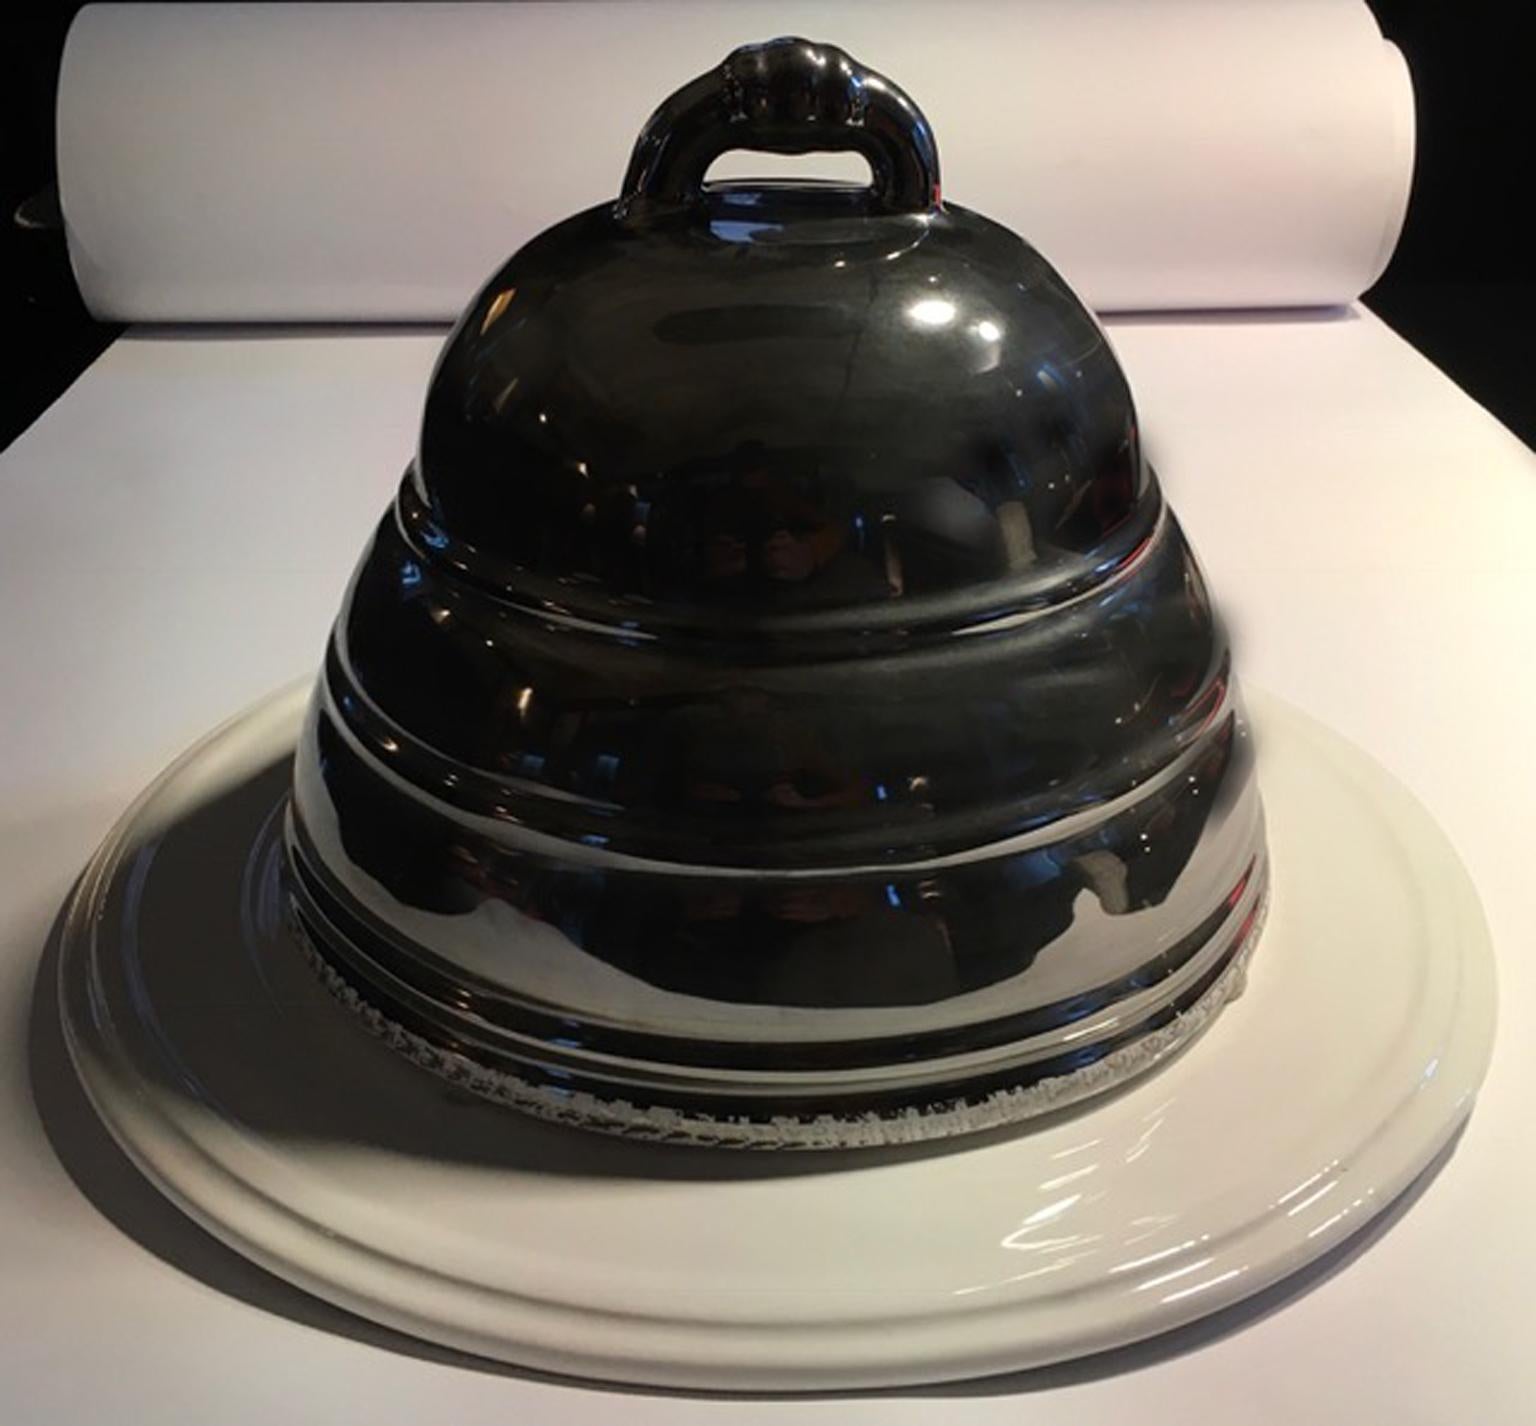 France White and Silver Ceramic Cake Dome with Circular Tray For Sale 9